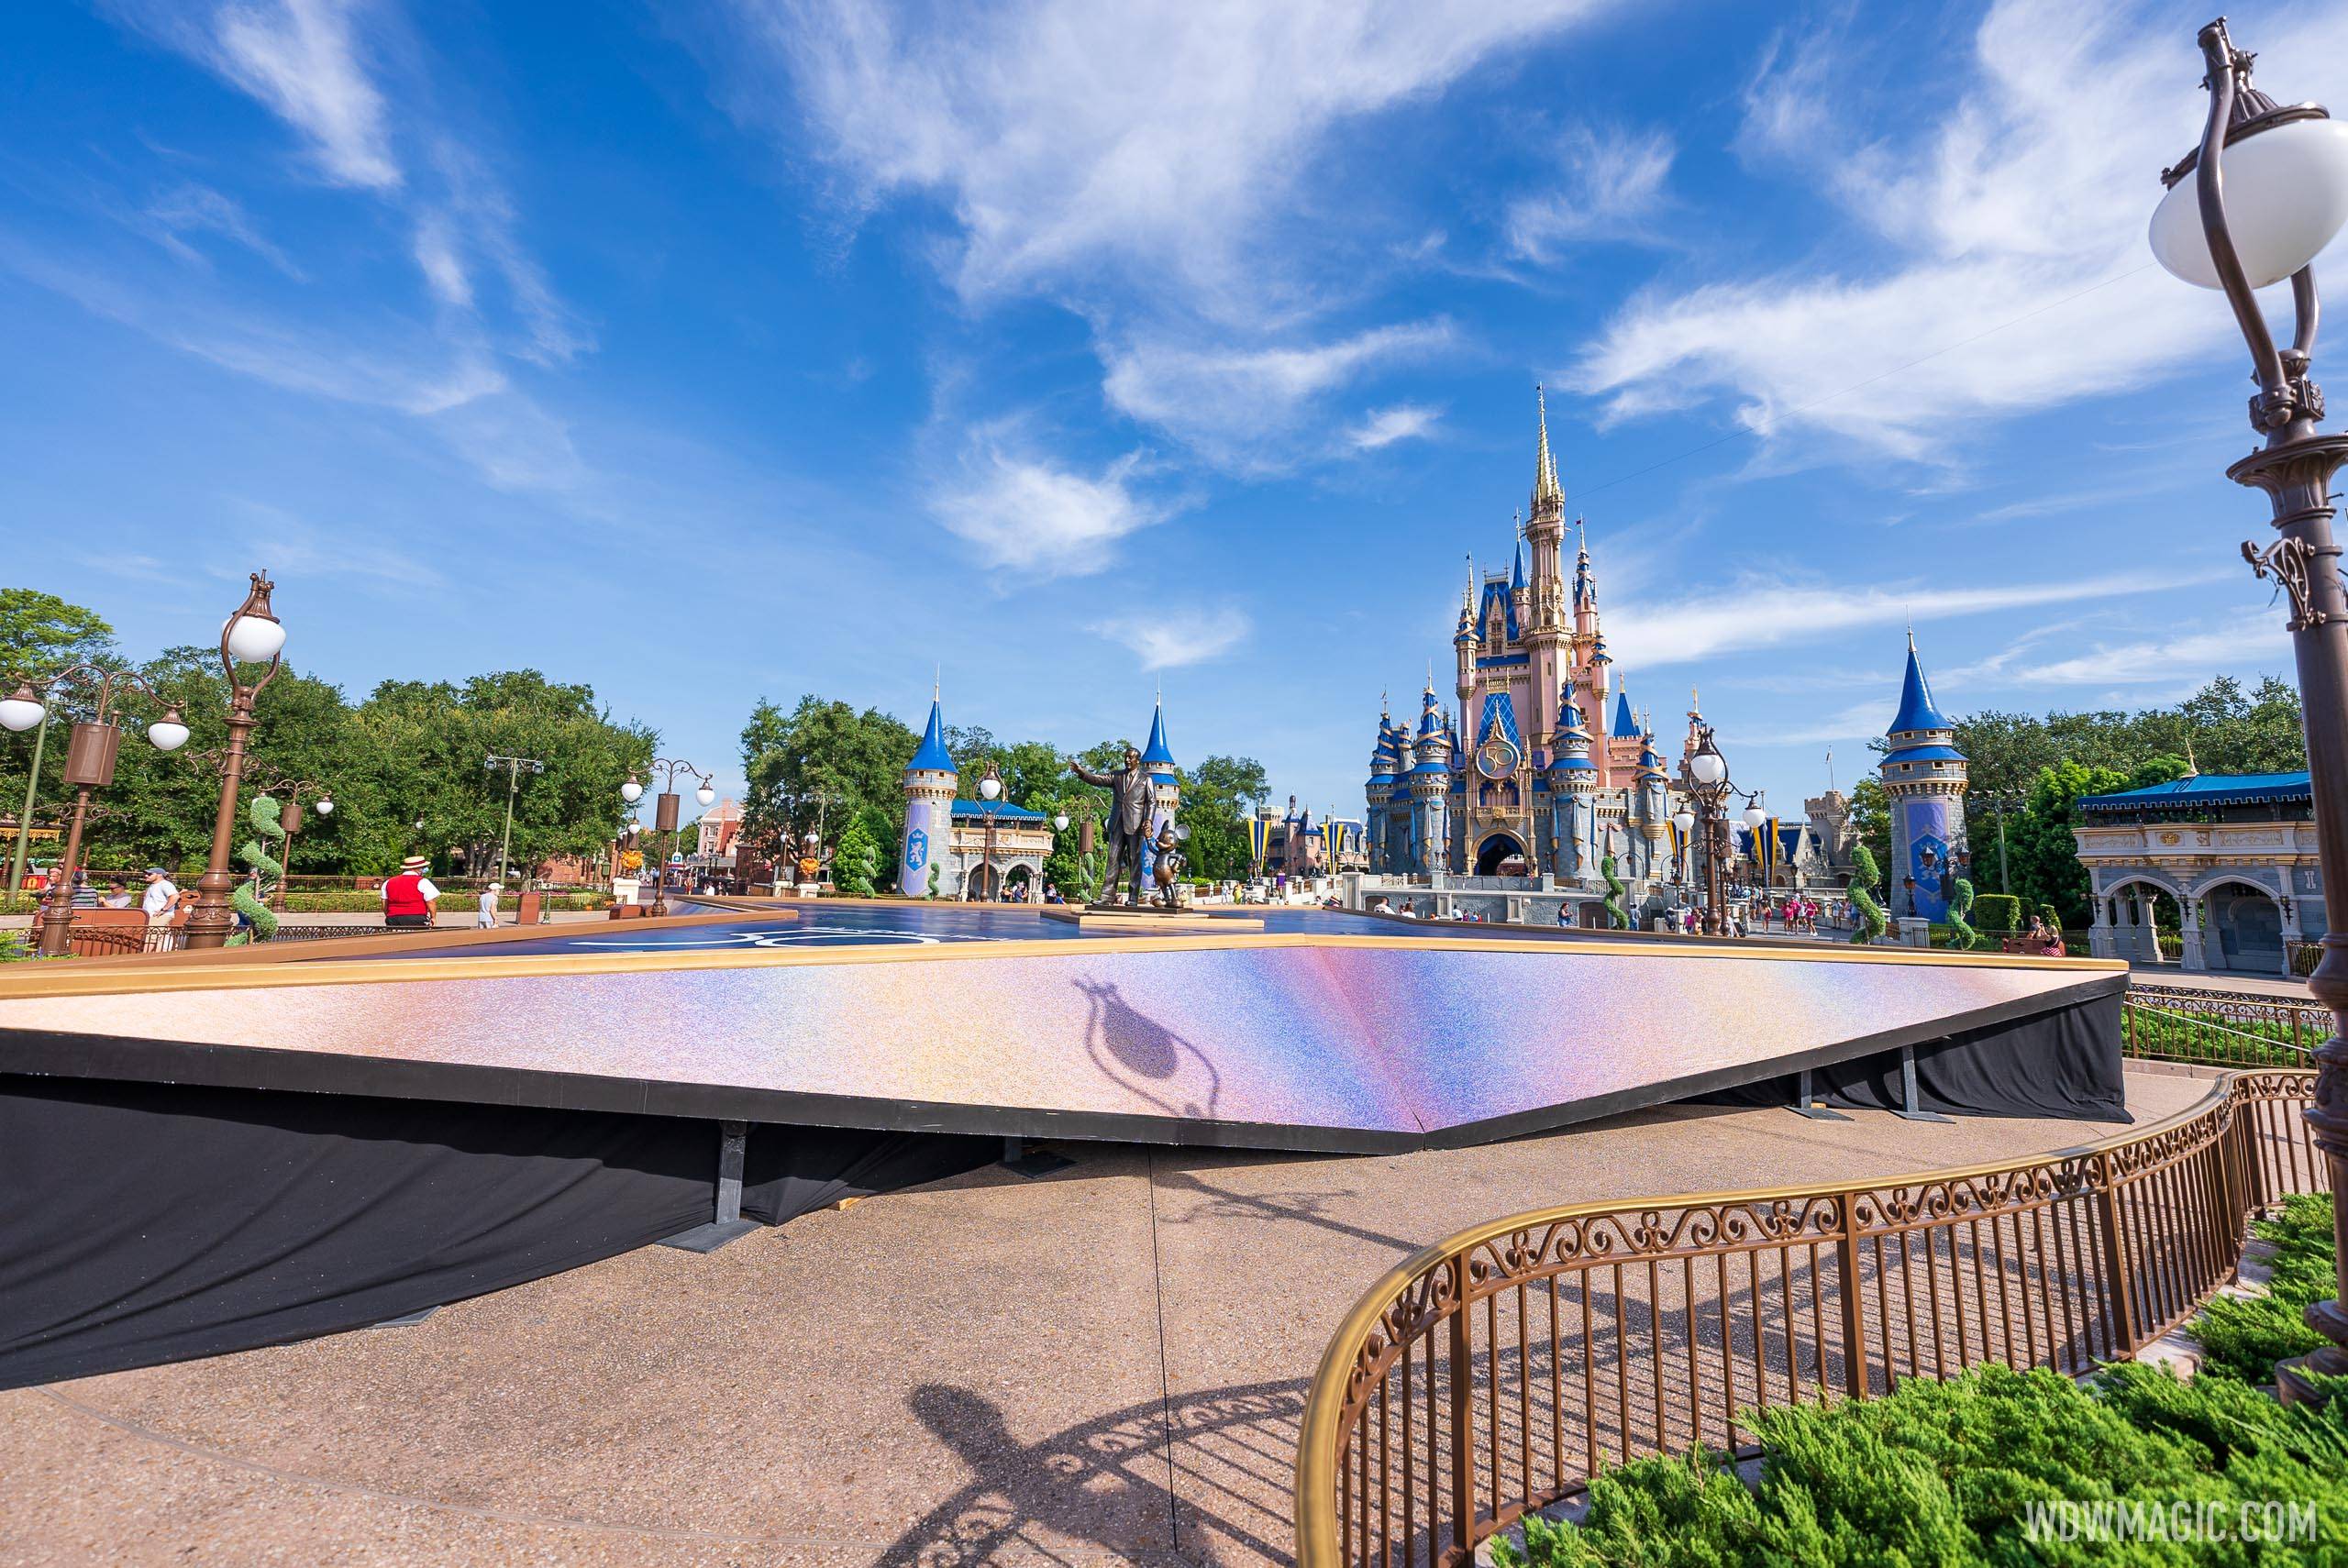 The World's Most Magical Celebration TV special stage at the Magic Kingdom